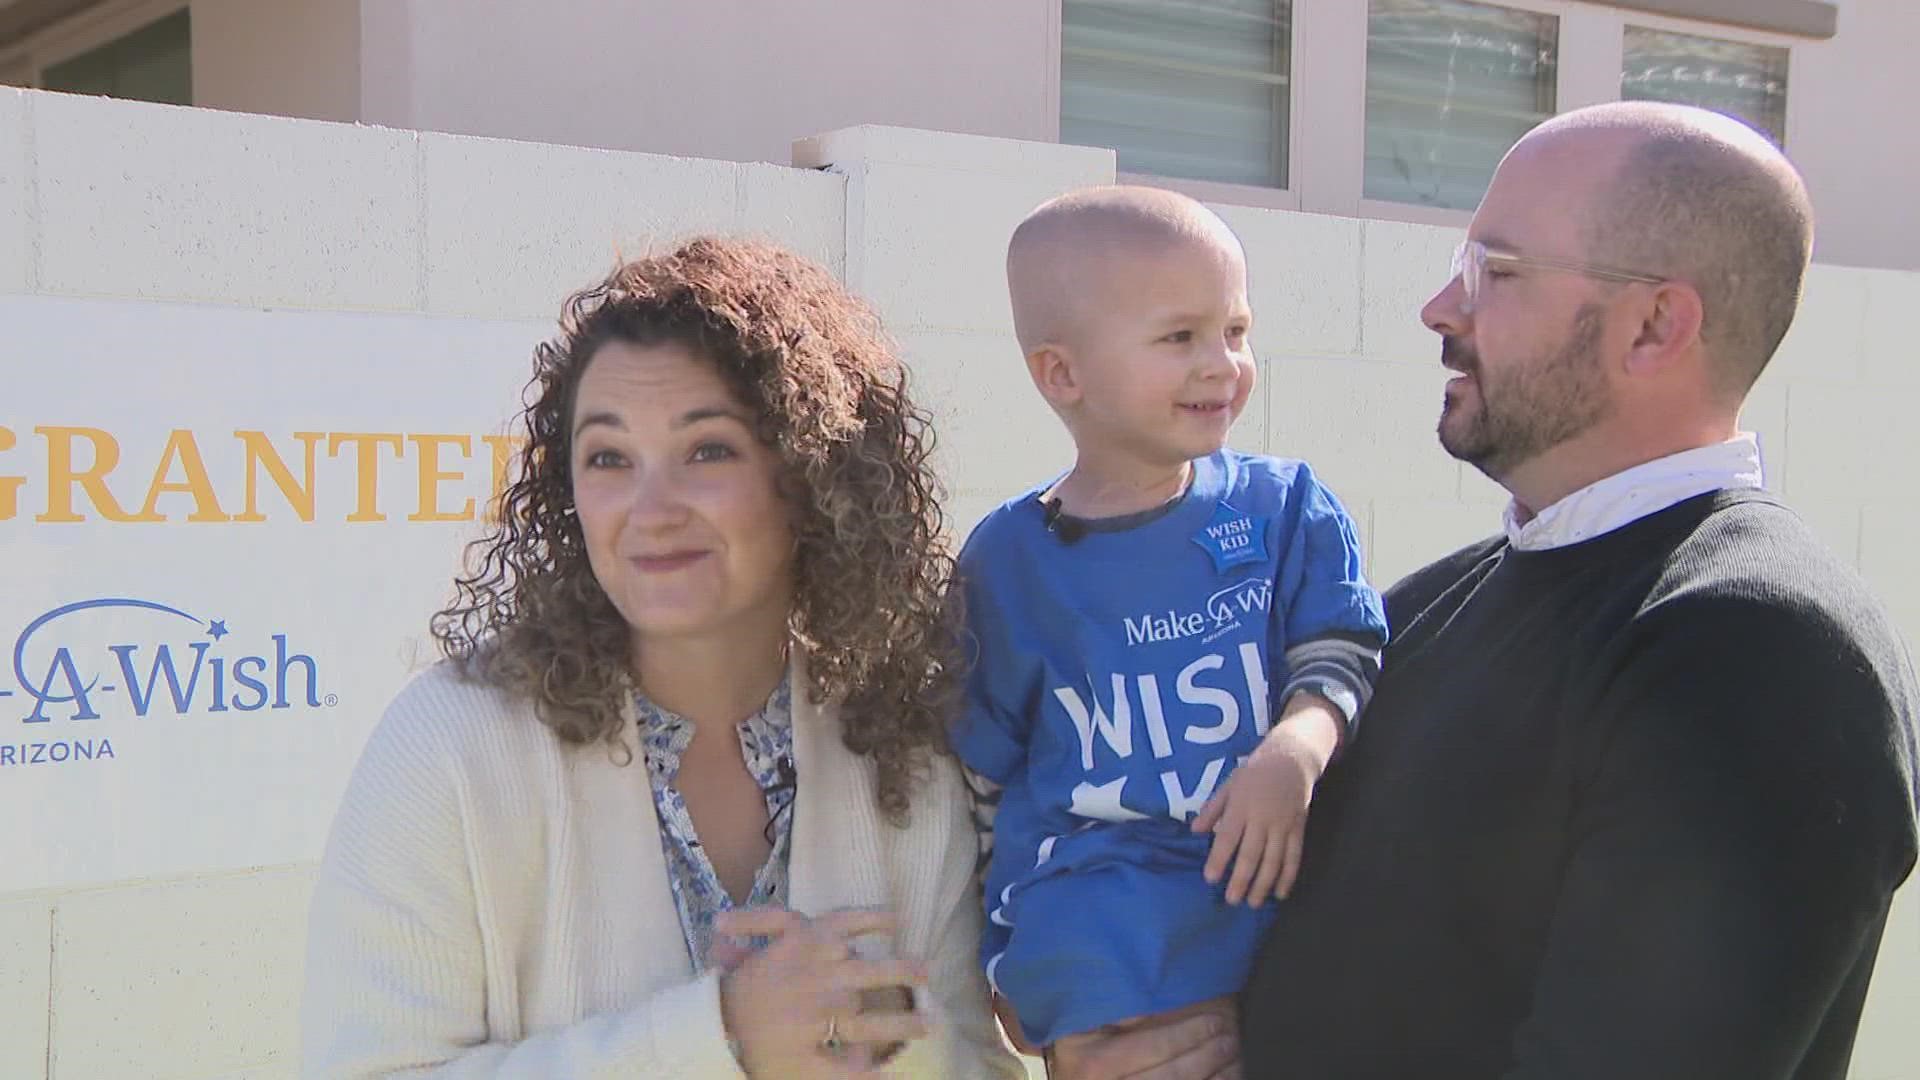 The non-profit helped the 3-year-old who is battling leukemia.